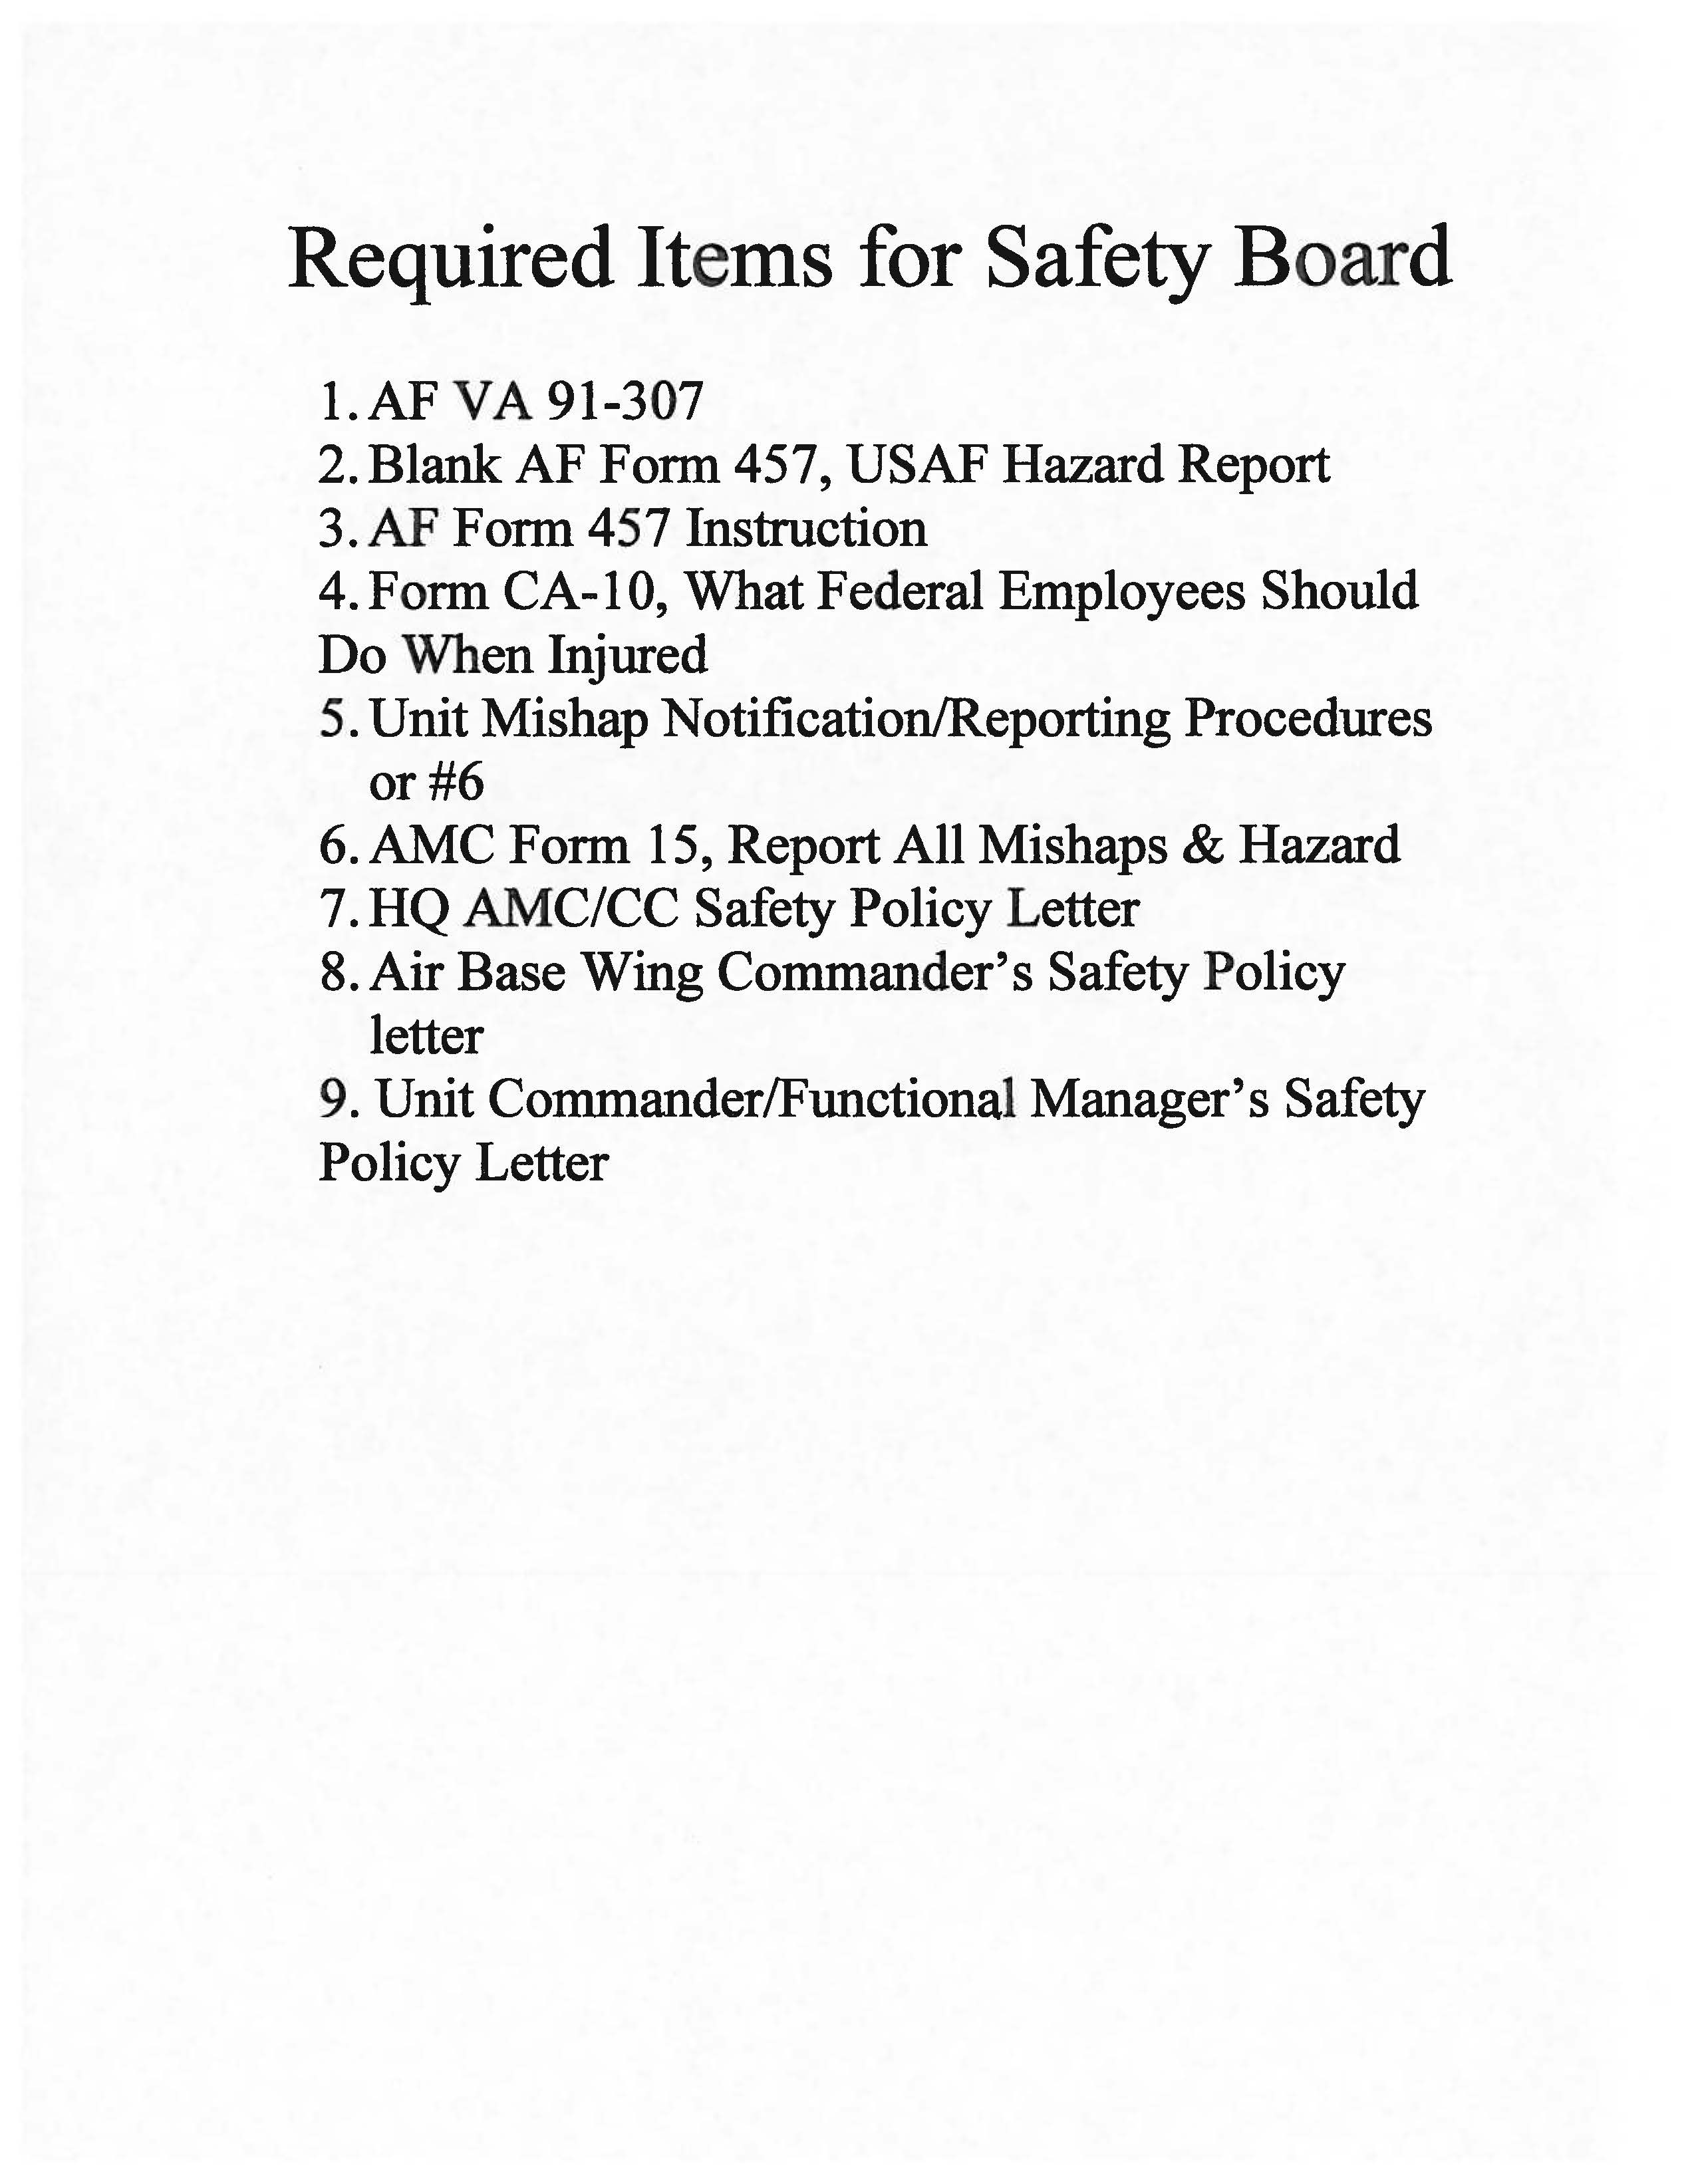 A document with the require items for a safety board